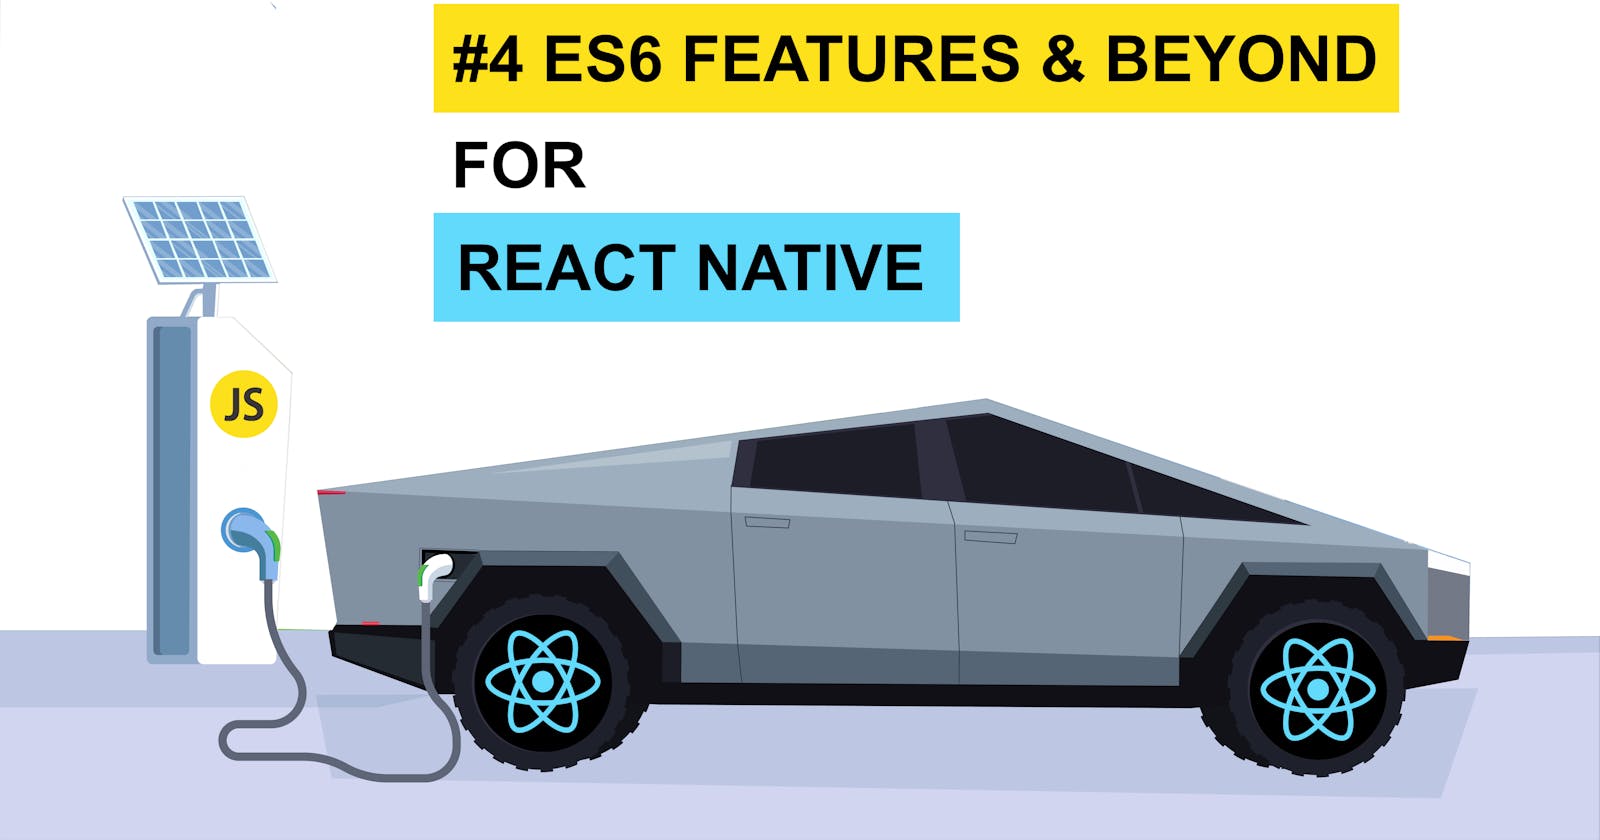 JavaScript Essentials for React Native - #4 ES6 and Beyond